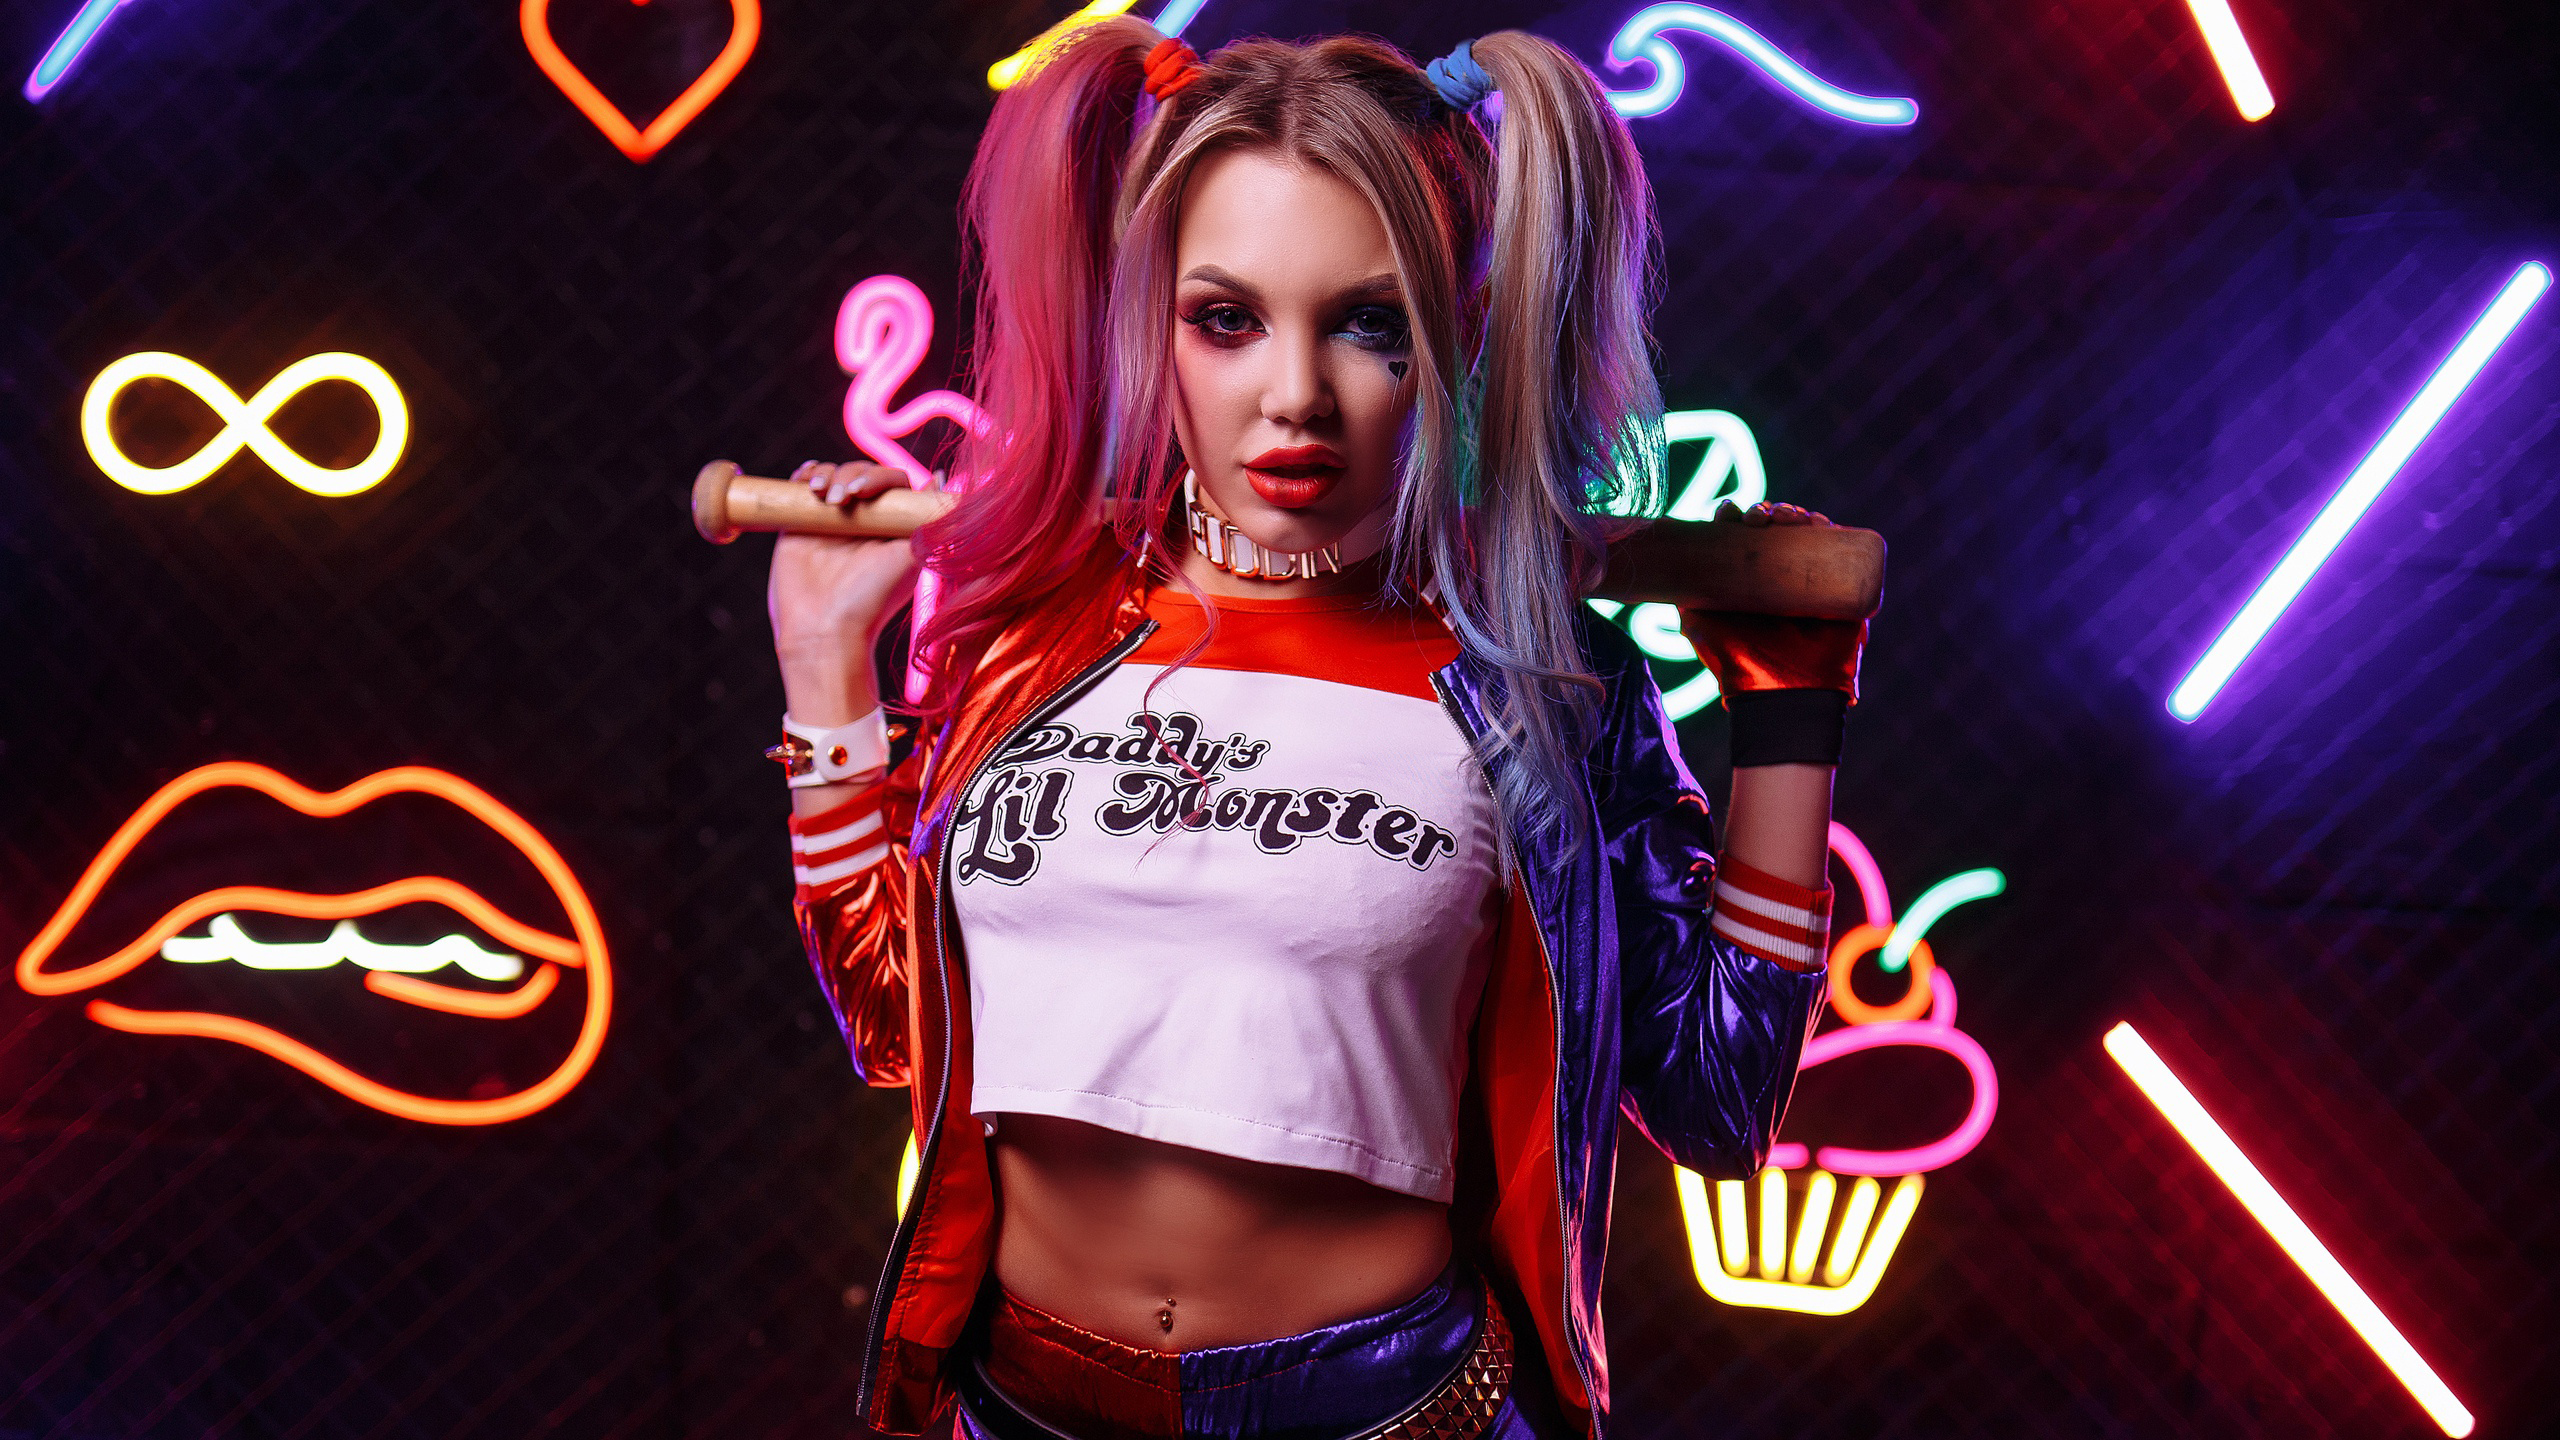 Harley Quinn Is Standing With Wallpaper Of Colorful Lights 2K Harley Quinn